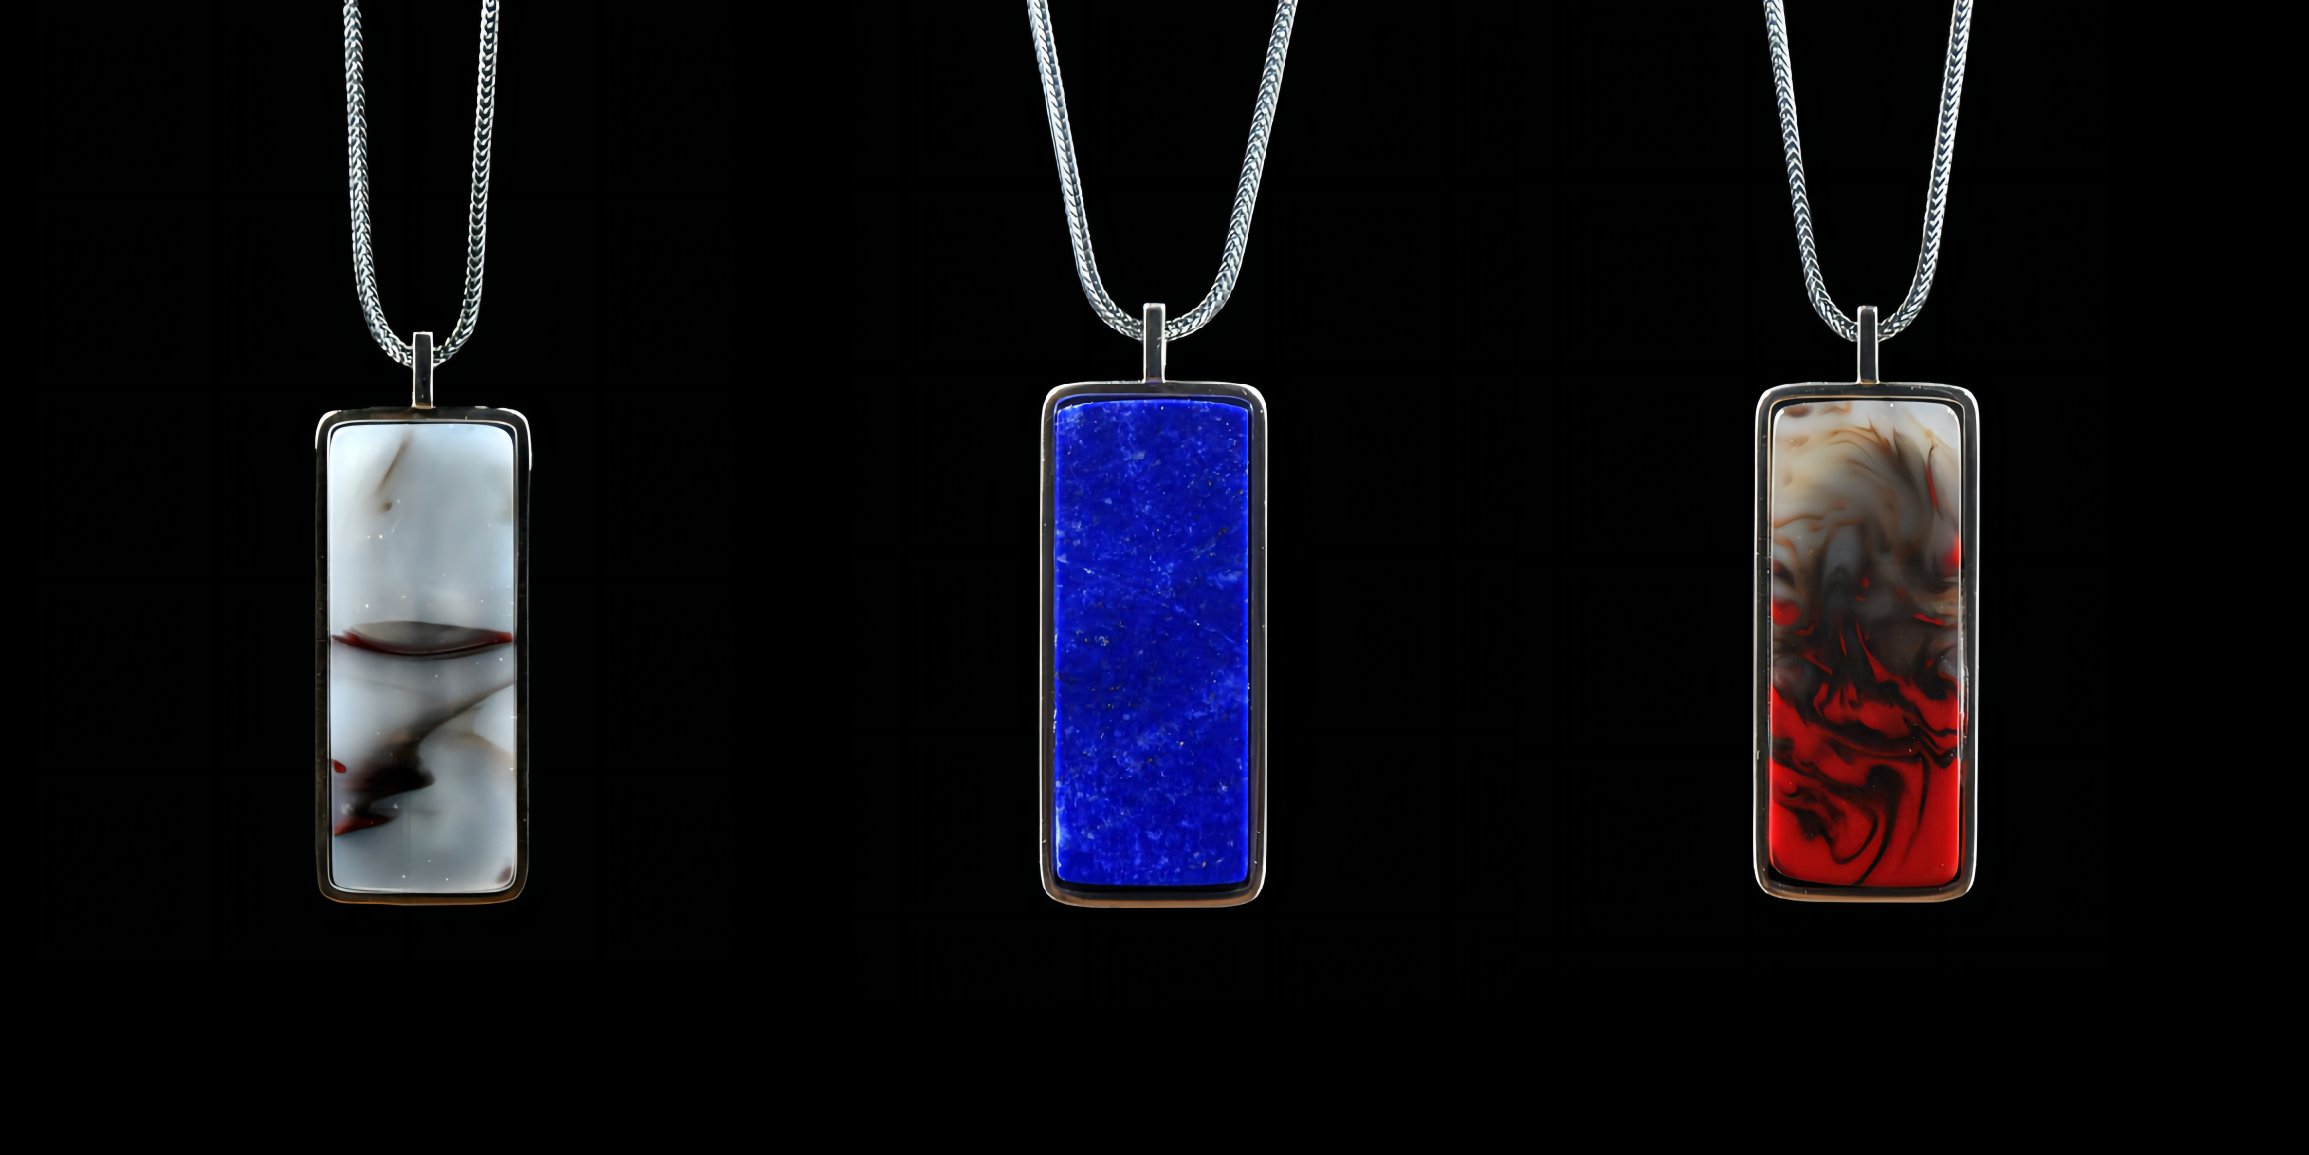 DYQ Jewelry Introduces New "Nothing To Worry" Pendant for Men